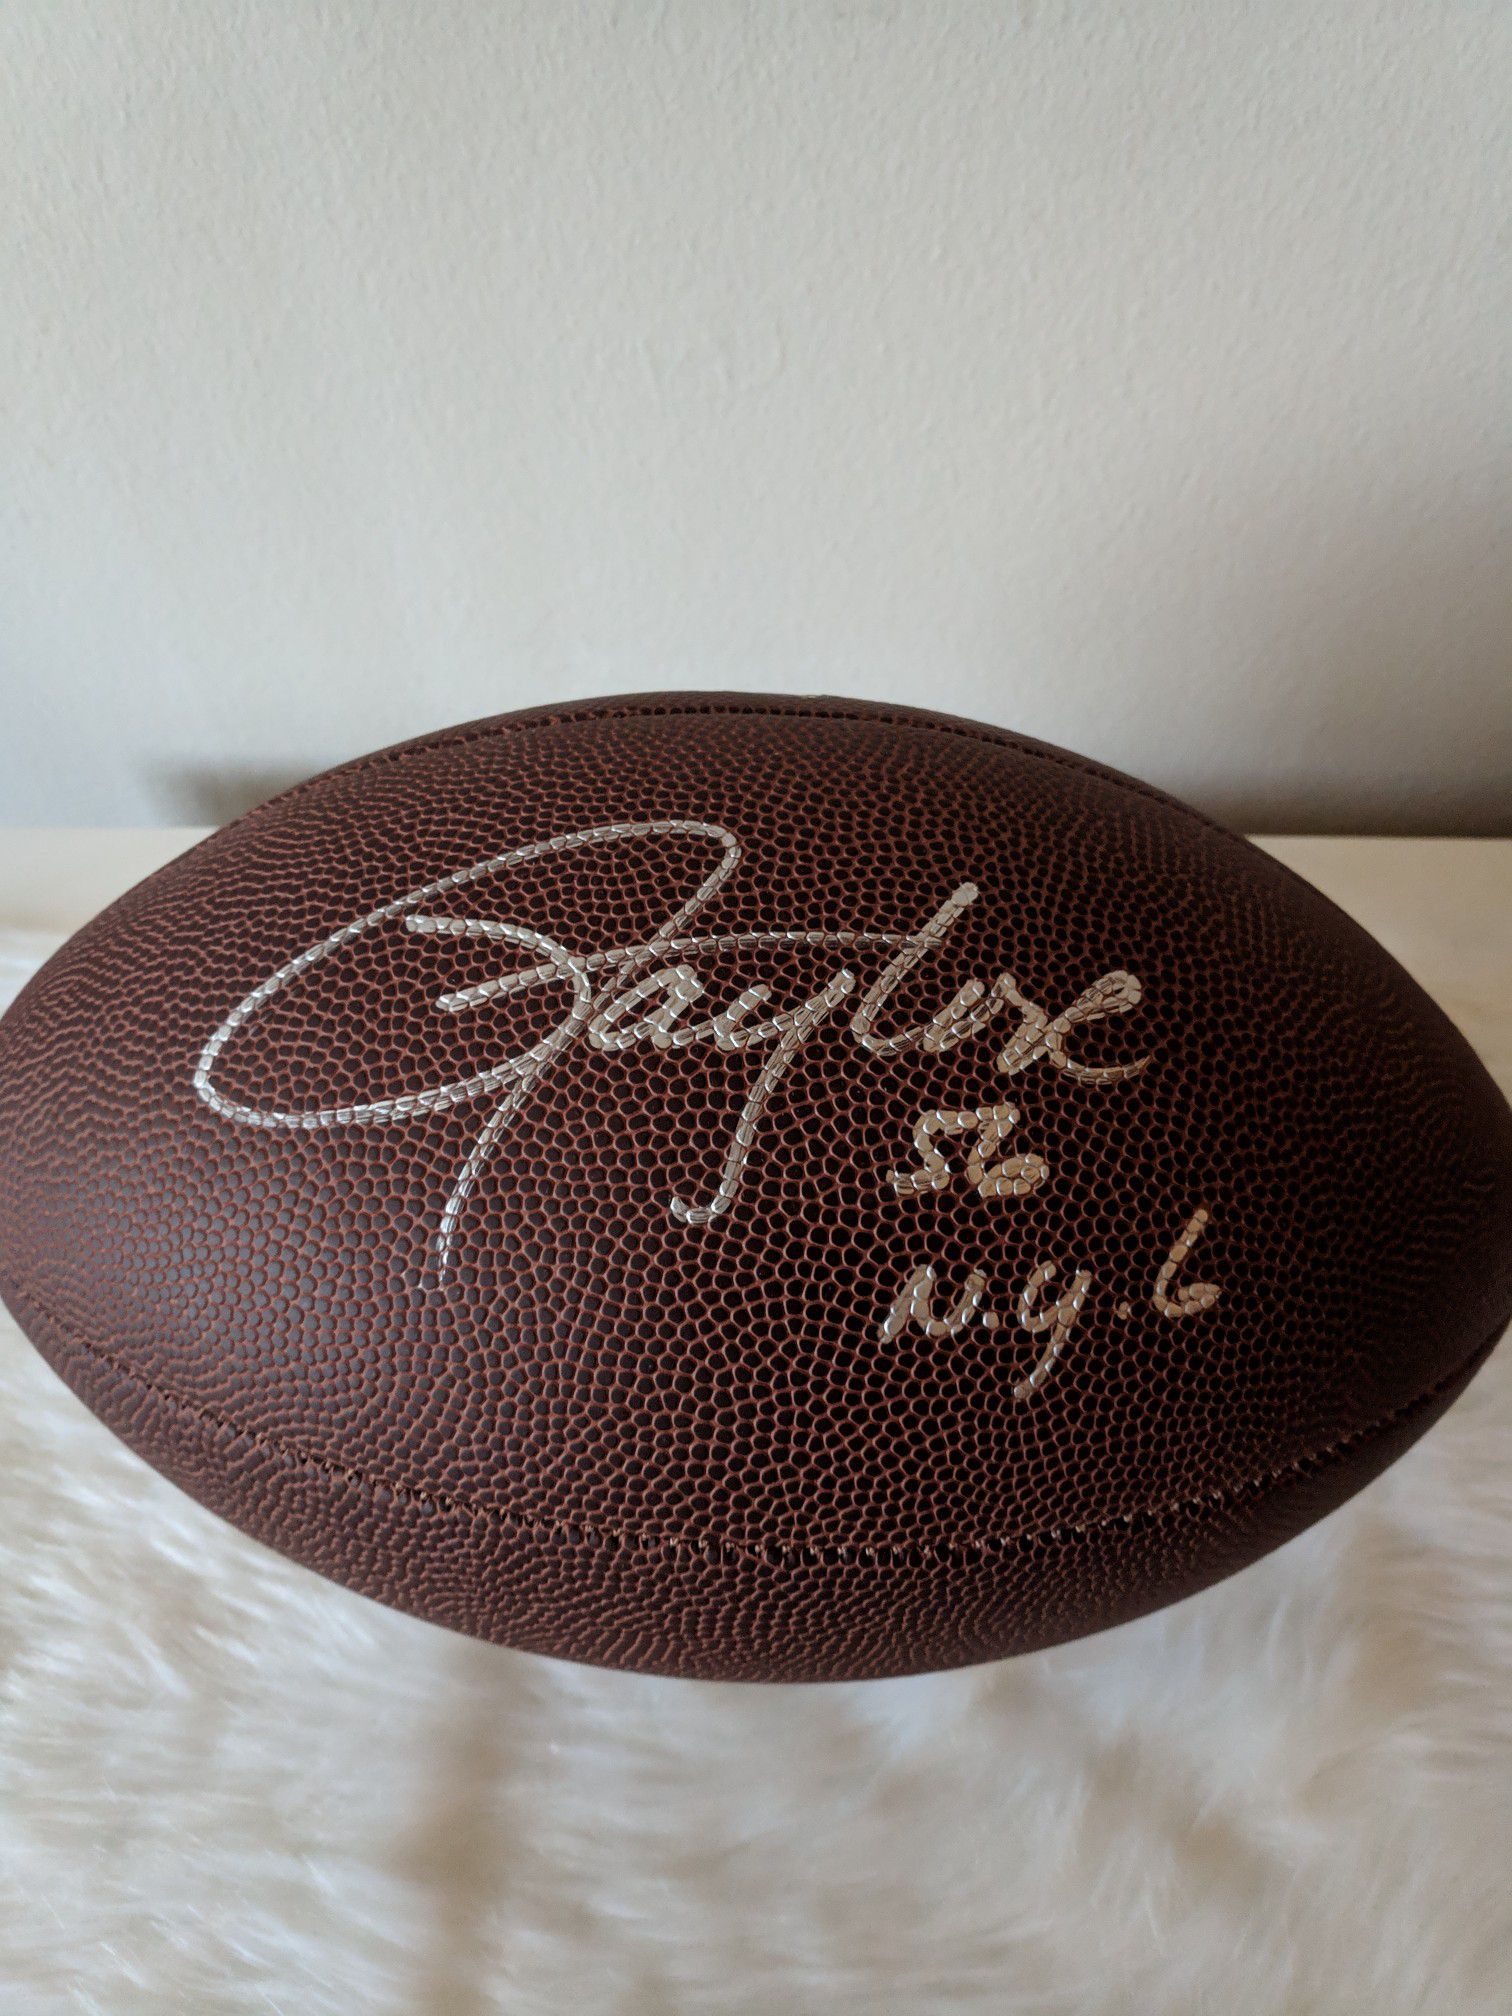 *NY GIANTS* (L.T.) Lawrence Taylor Autographed Football with COA